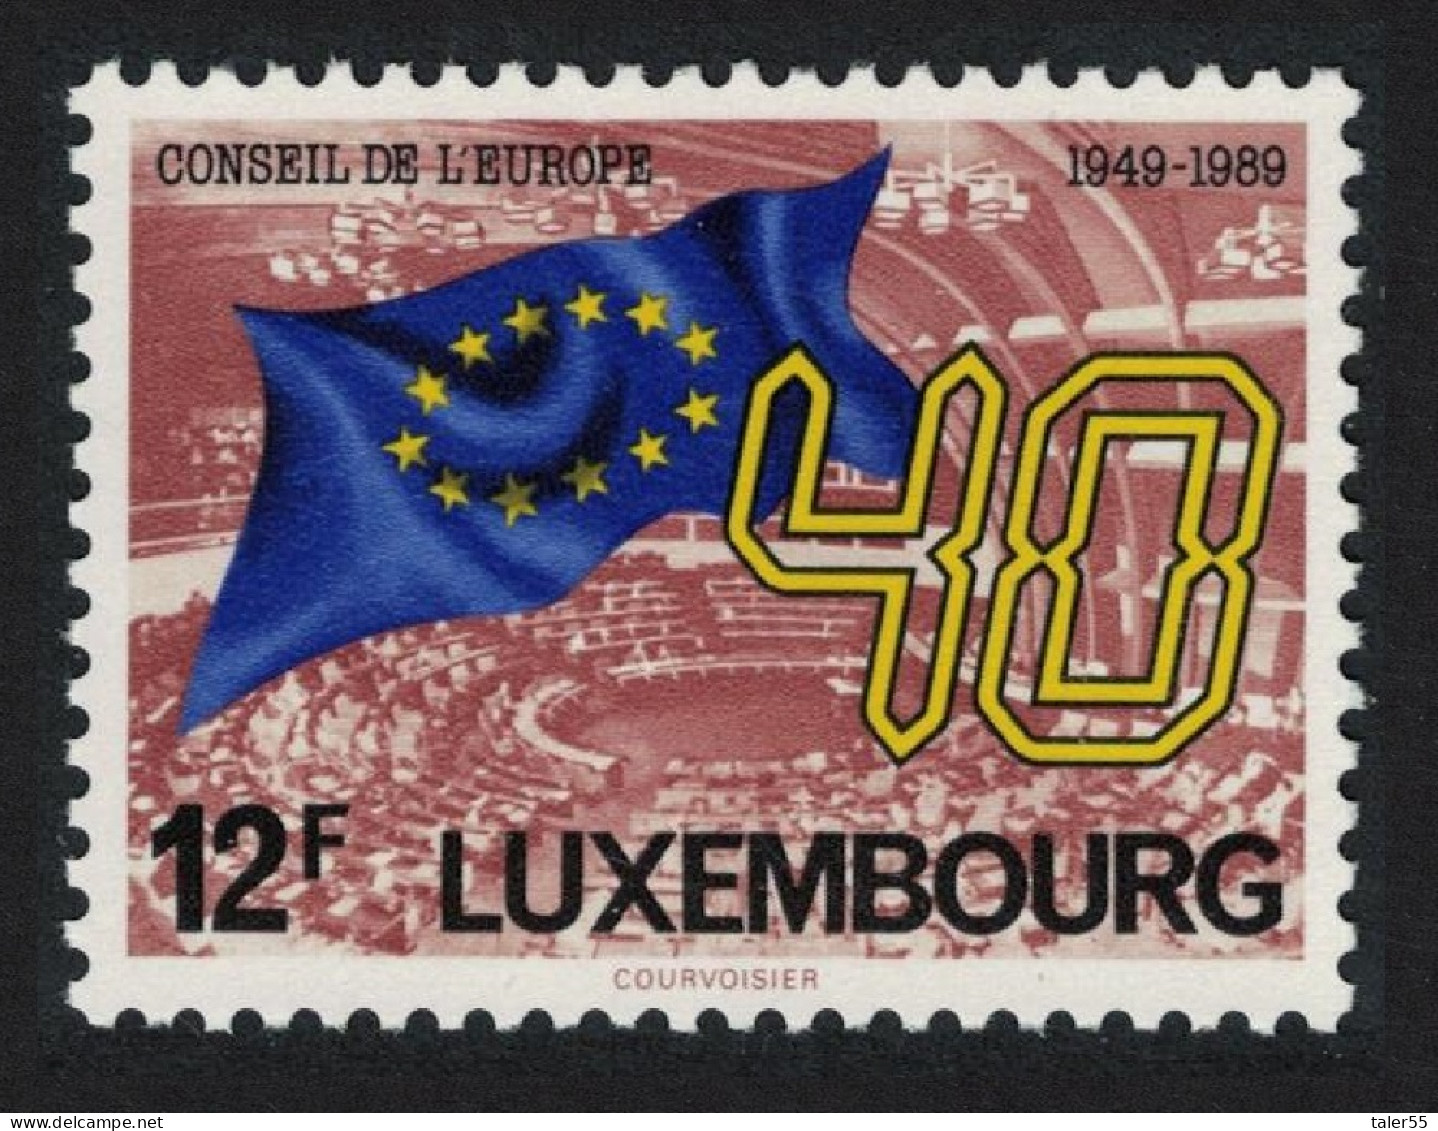 Luxembourg Council Of Europe 1989 MNH SG#1247 MI#1222 - Ungebraucht